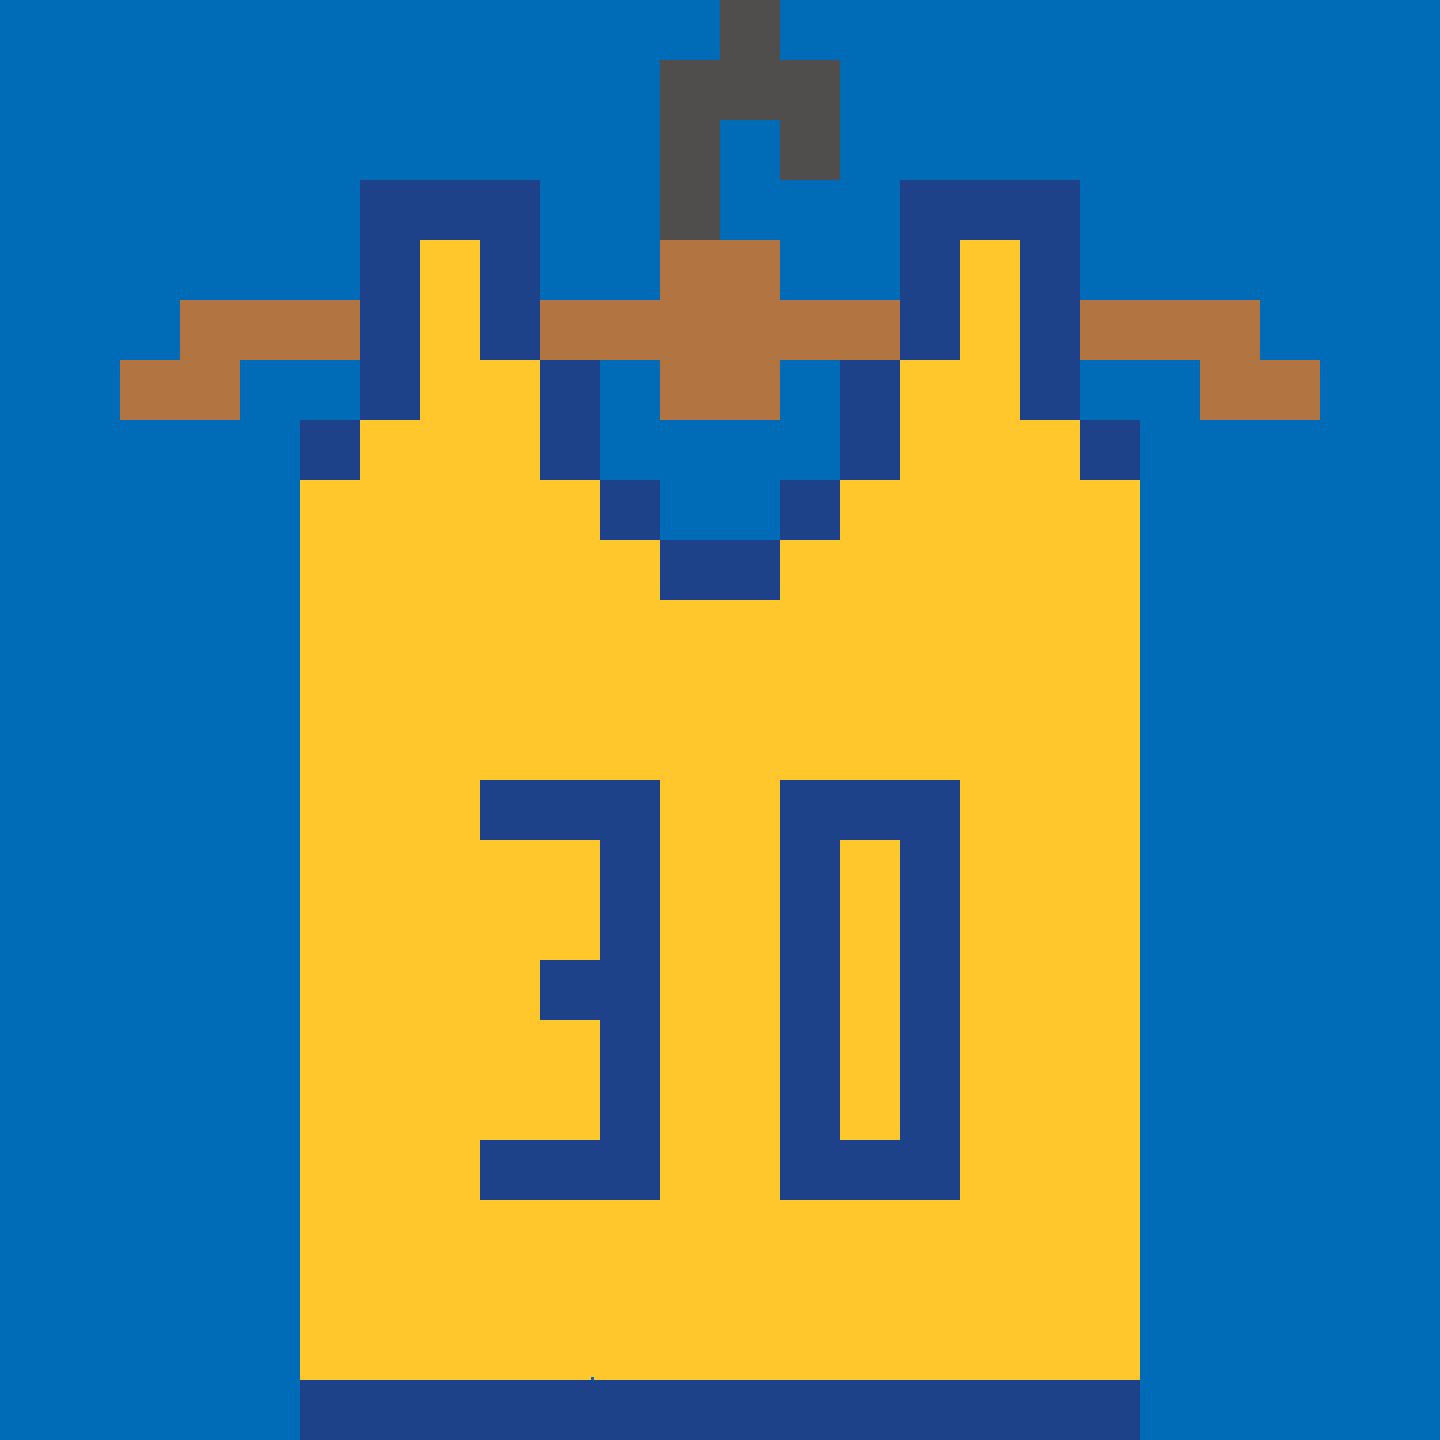 Steph Curry's Jersey